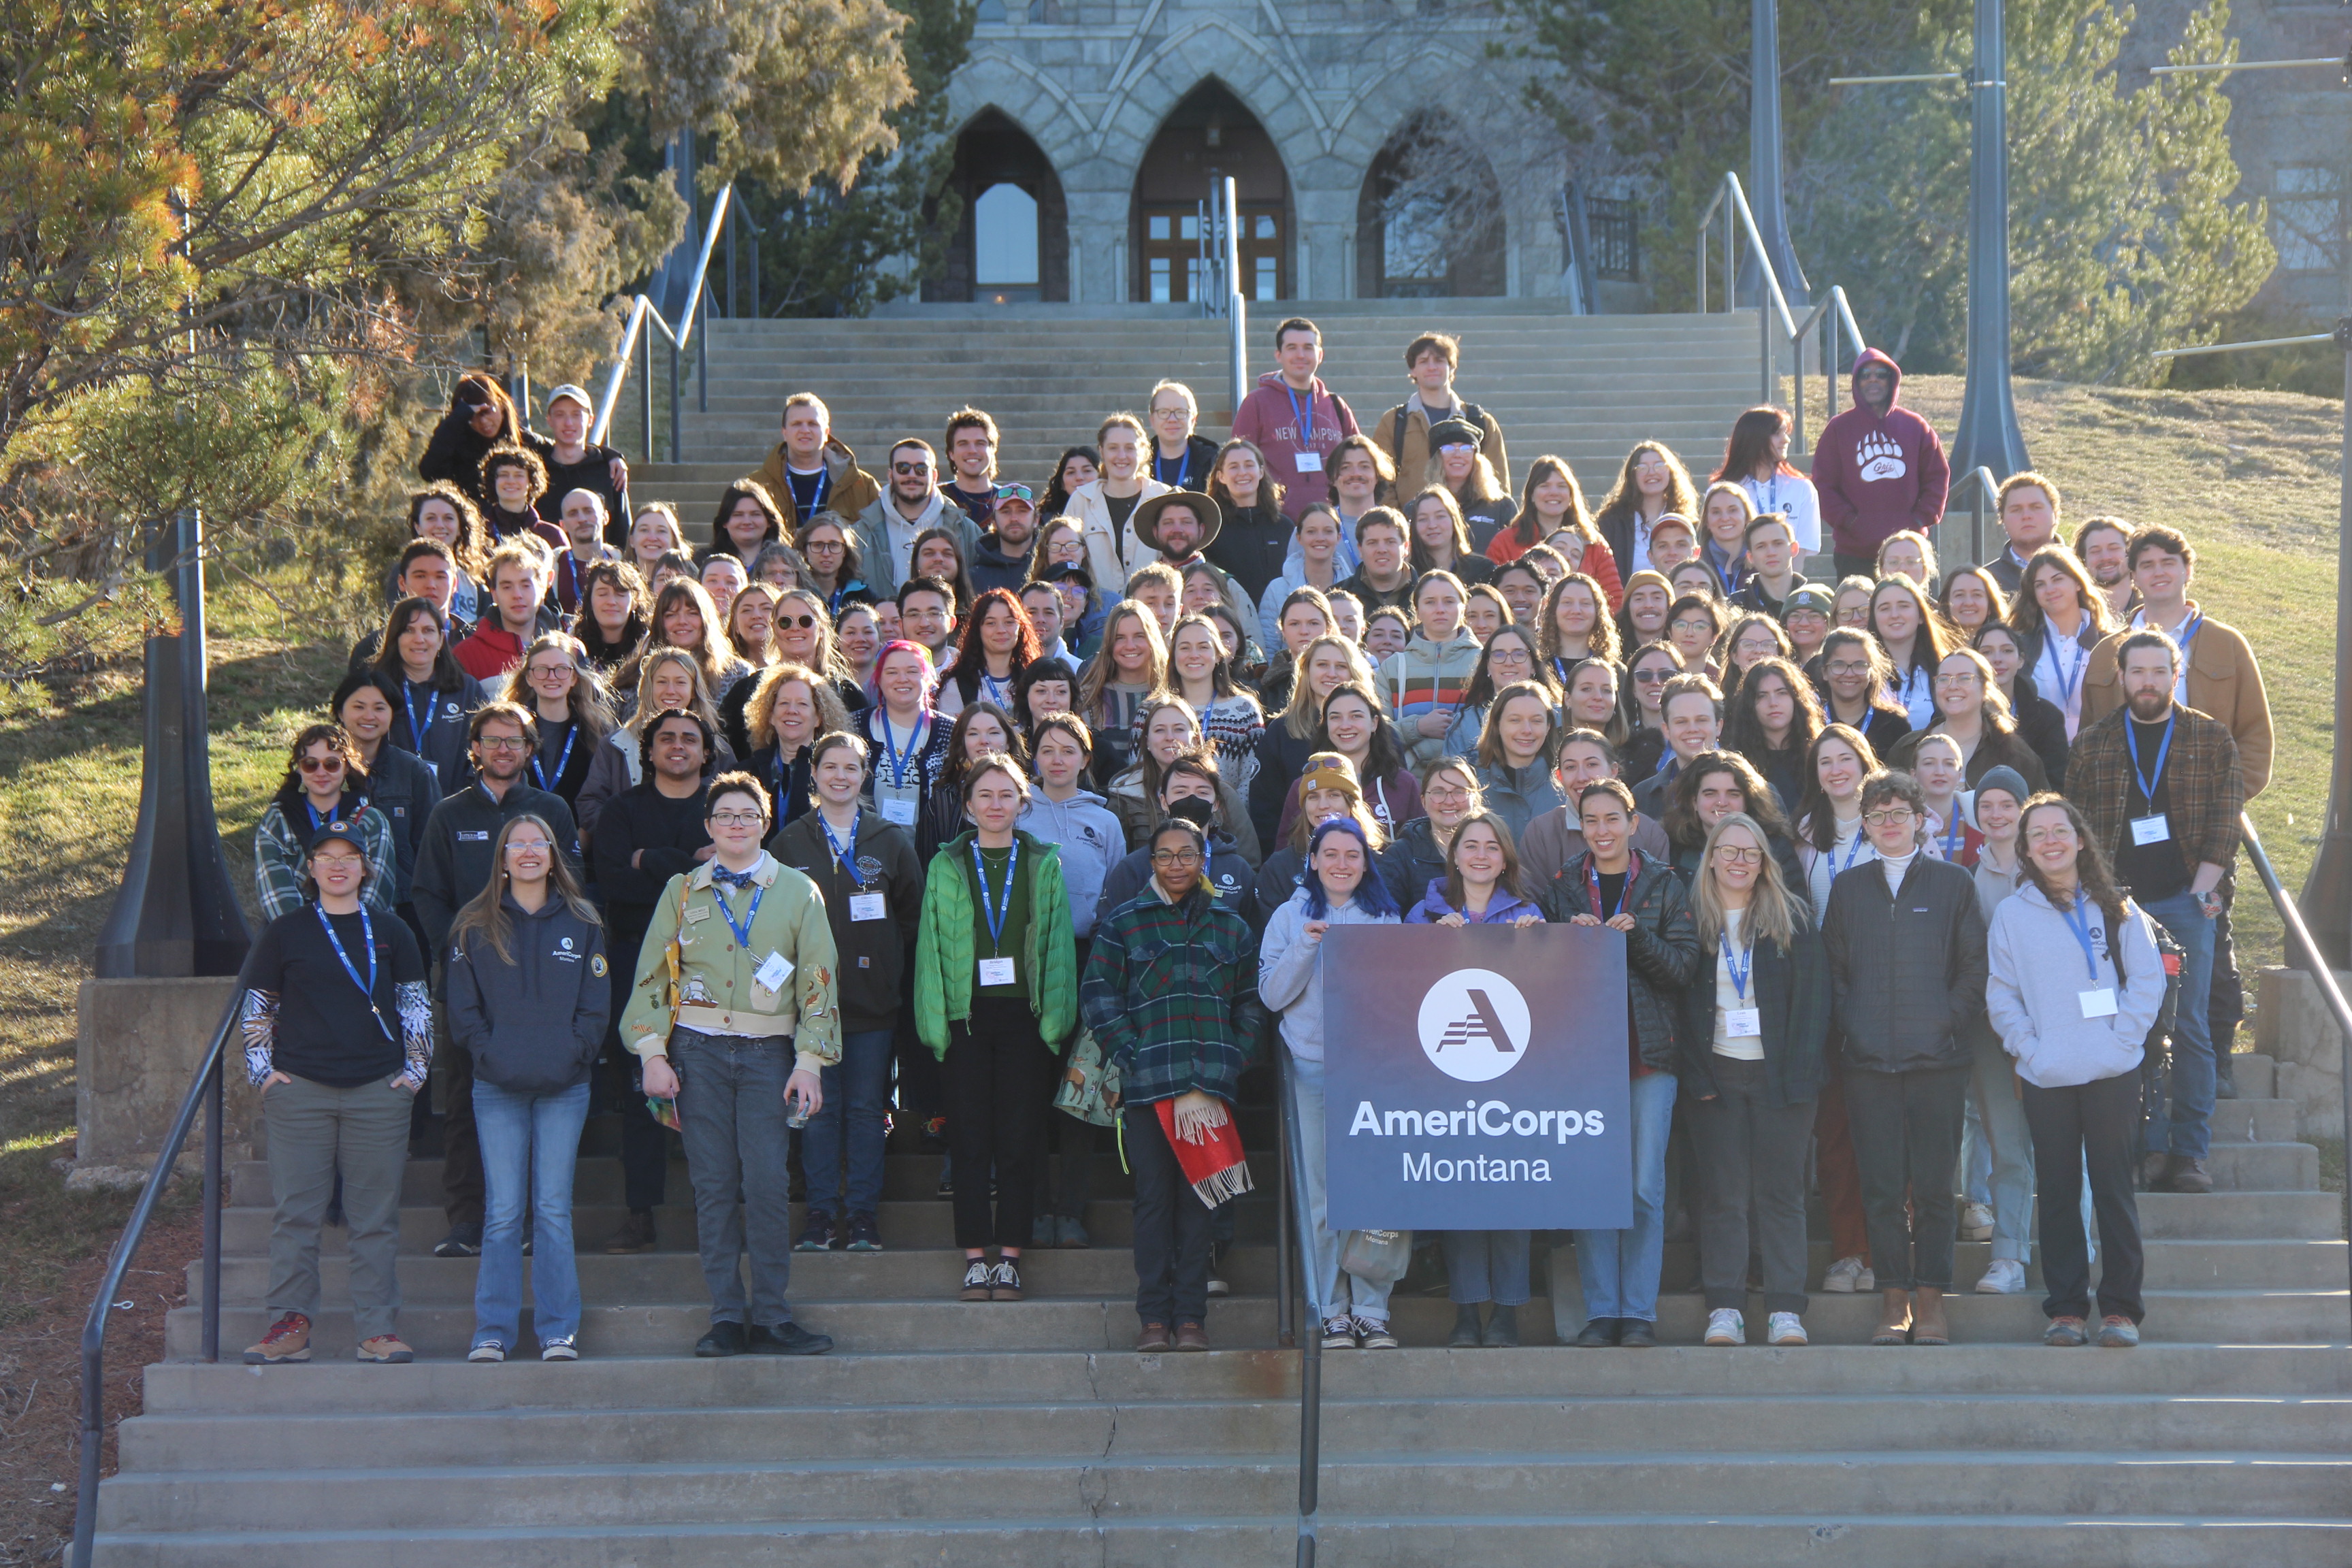 large group of individuals standing on staircase holding AmeriCorps logo